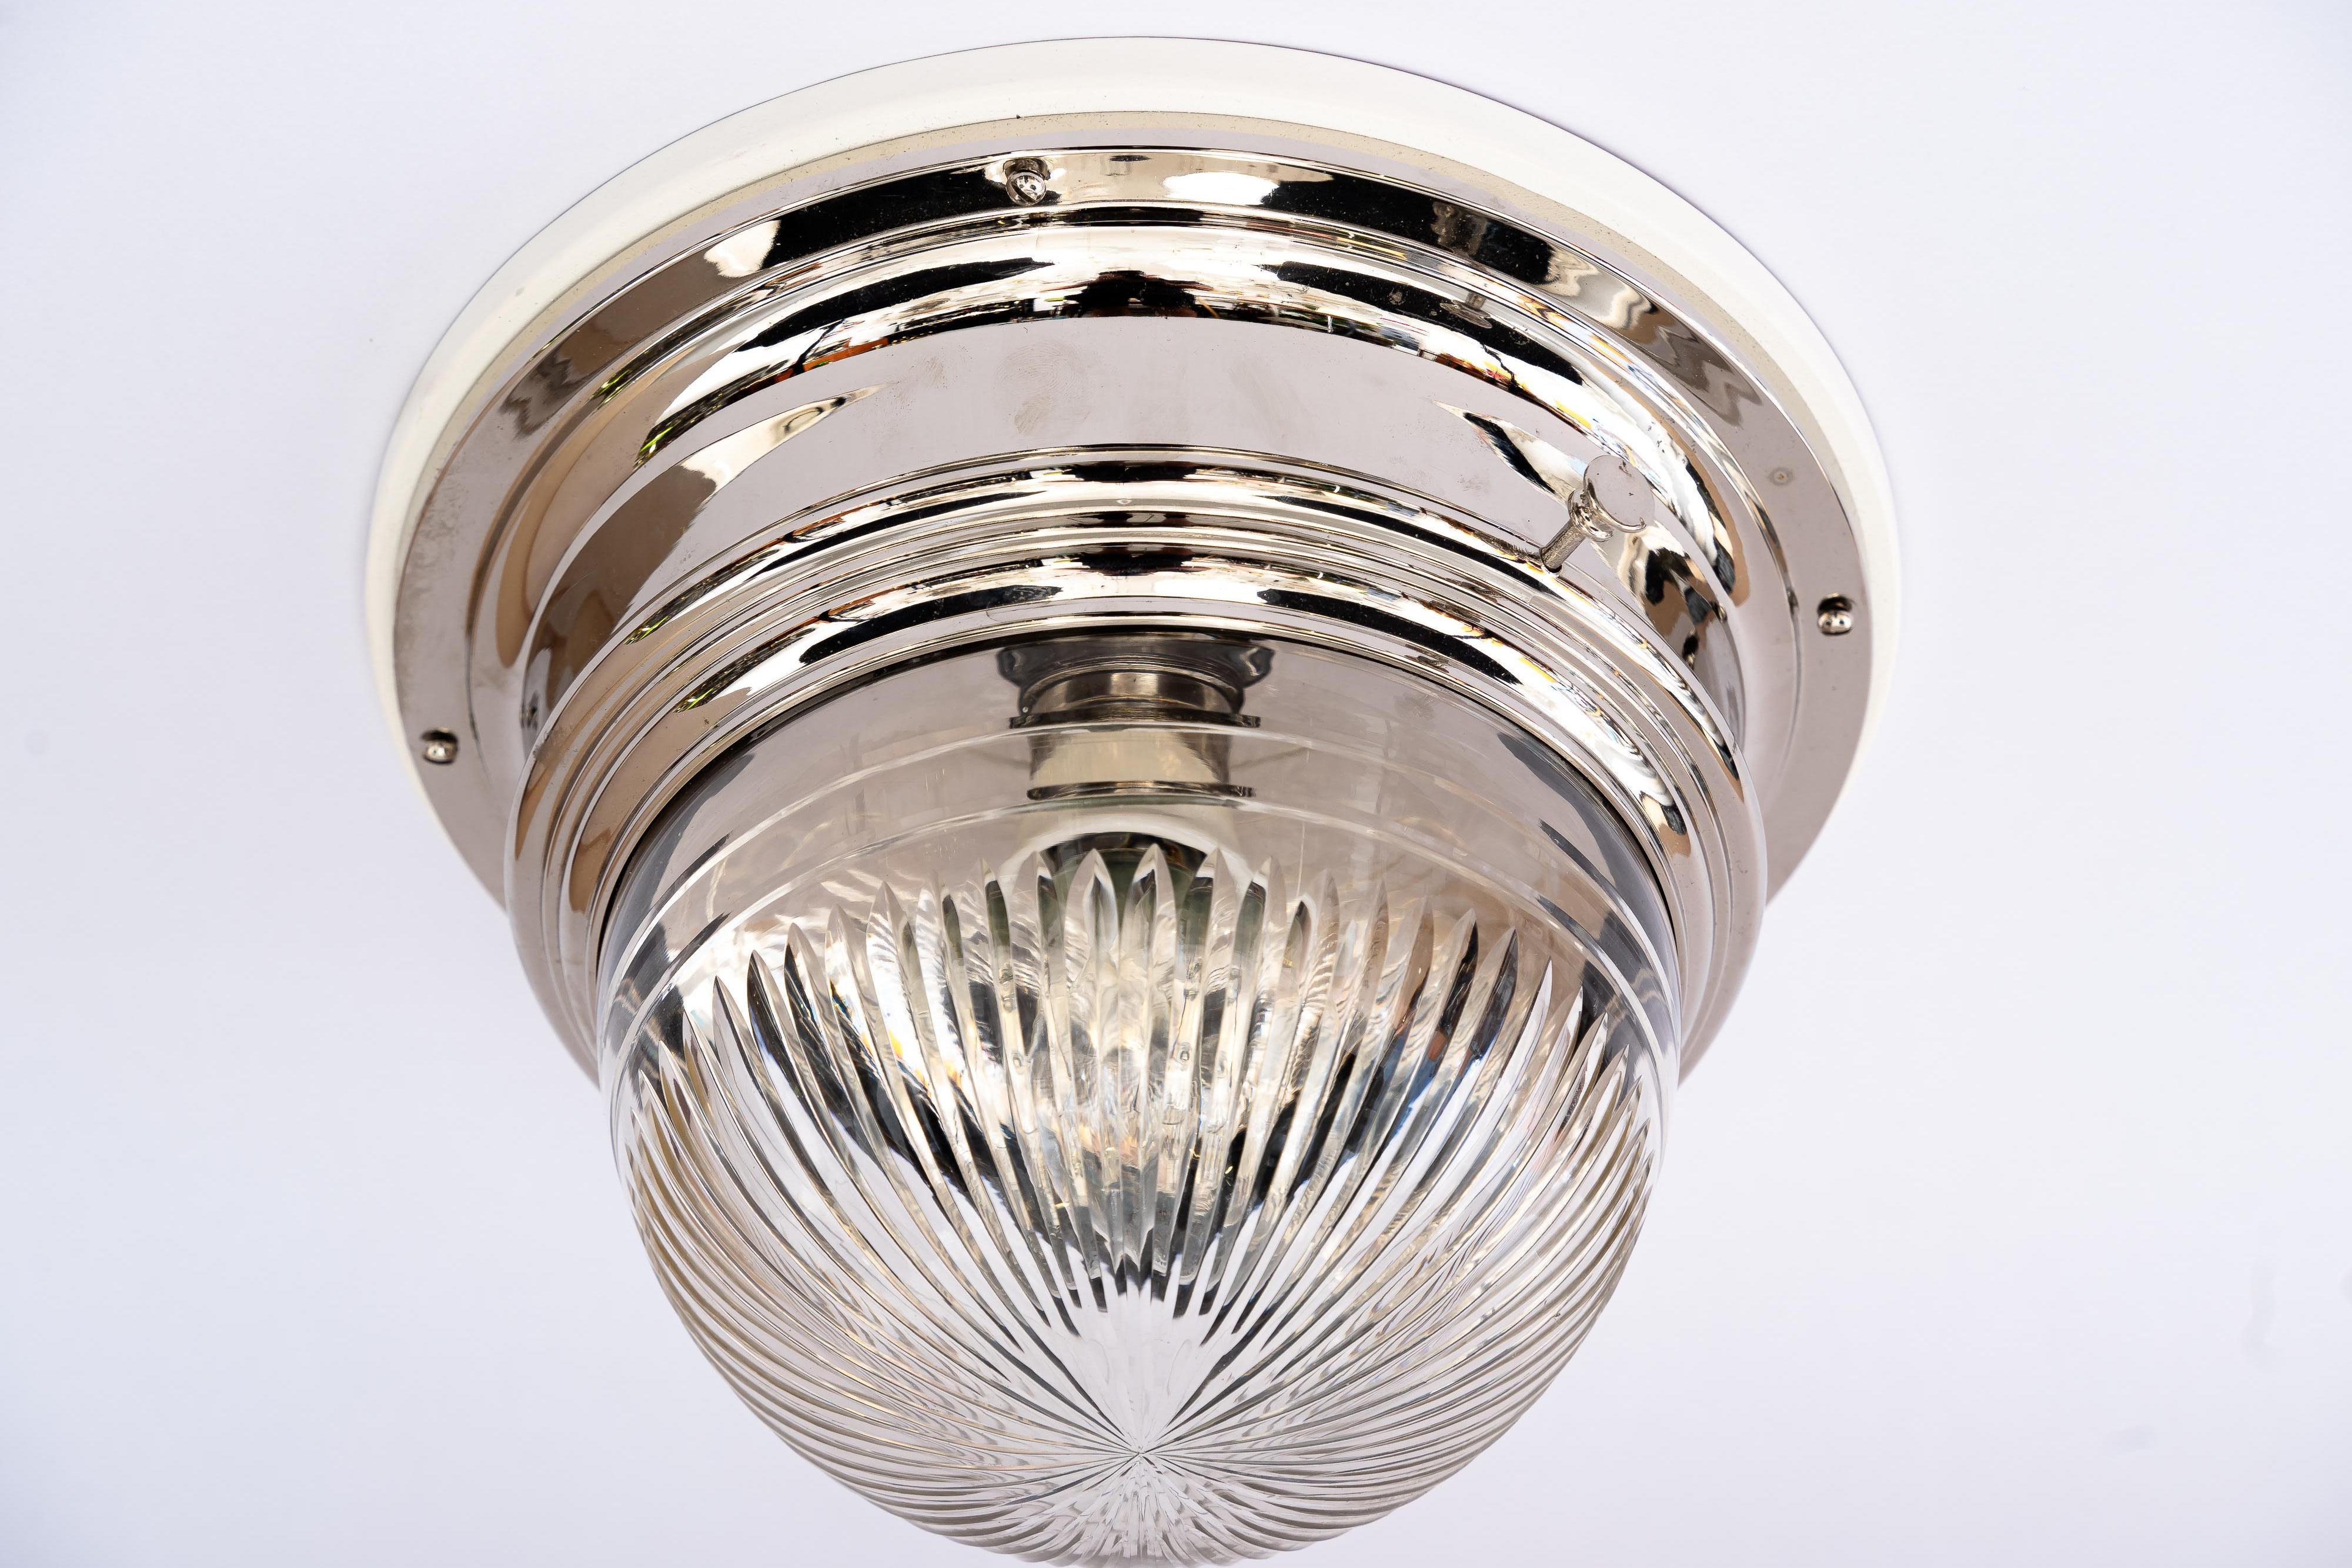 Art Deco nickel plated ceiling lamp with cut glass shade around 1920s
brass is nickel - plated
Original cut glass shade
Wood plate is white painted
